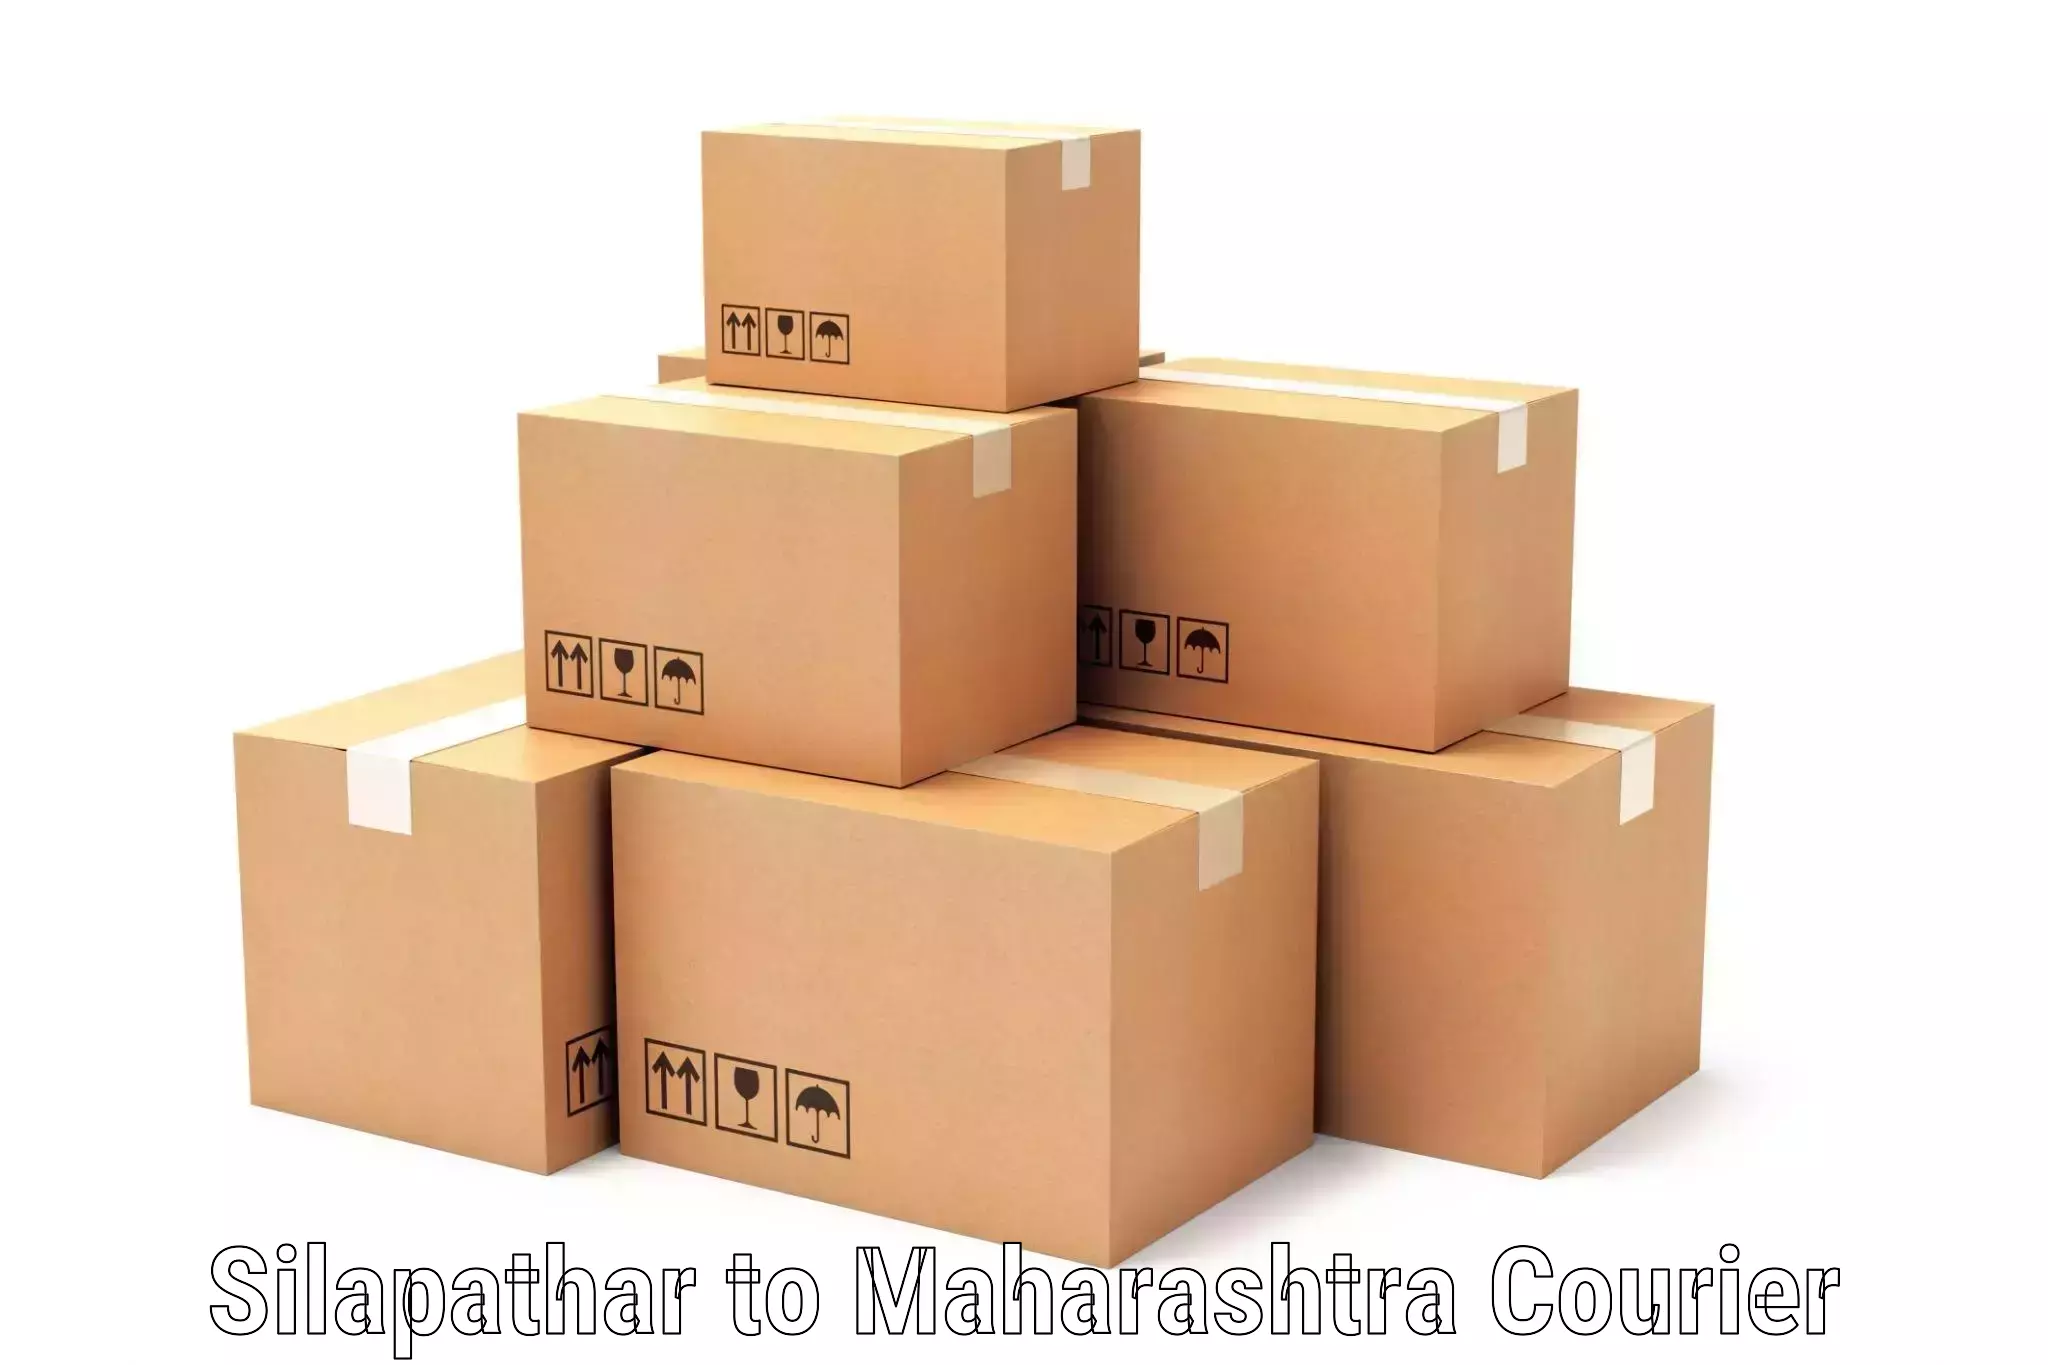 Global courier networks Silapathar to Newasa